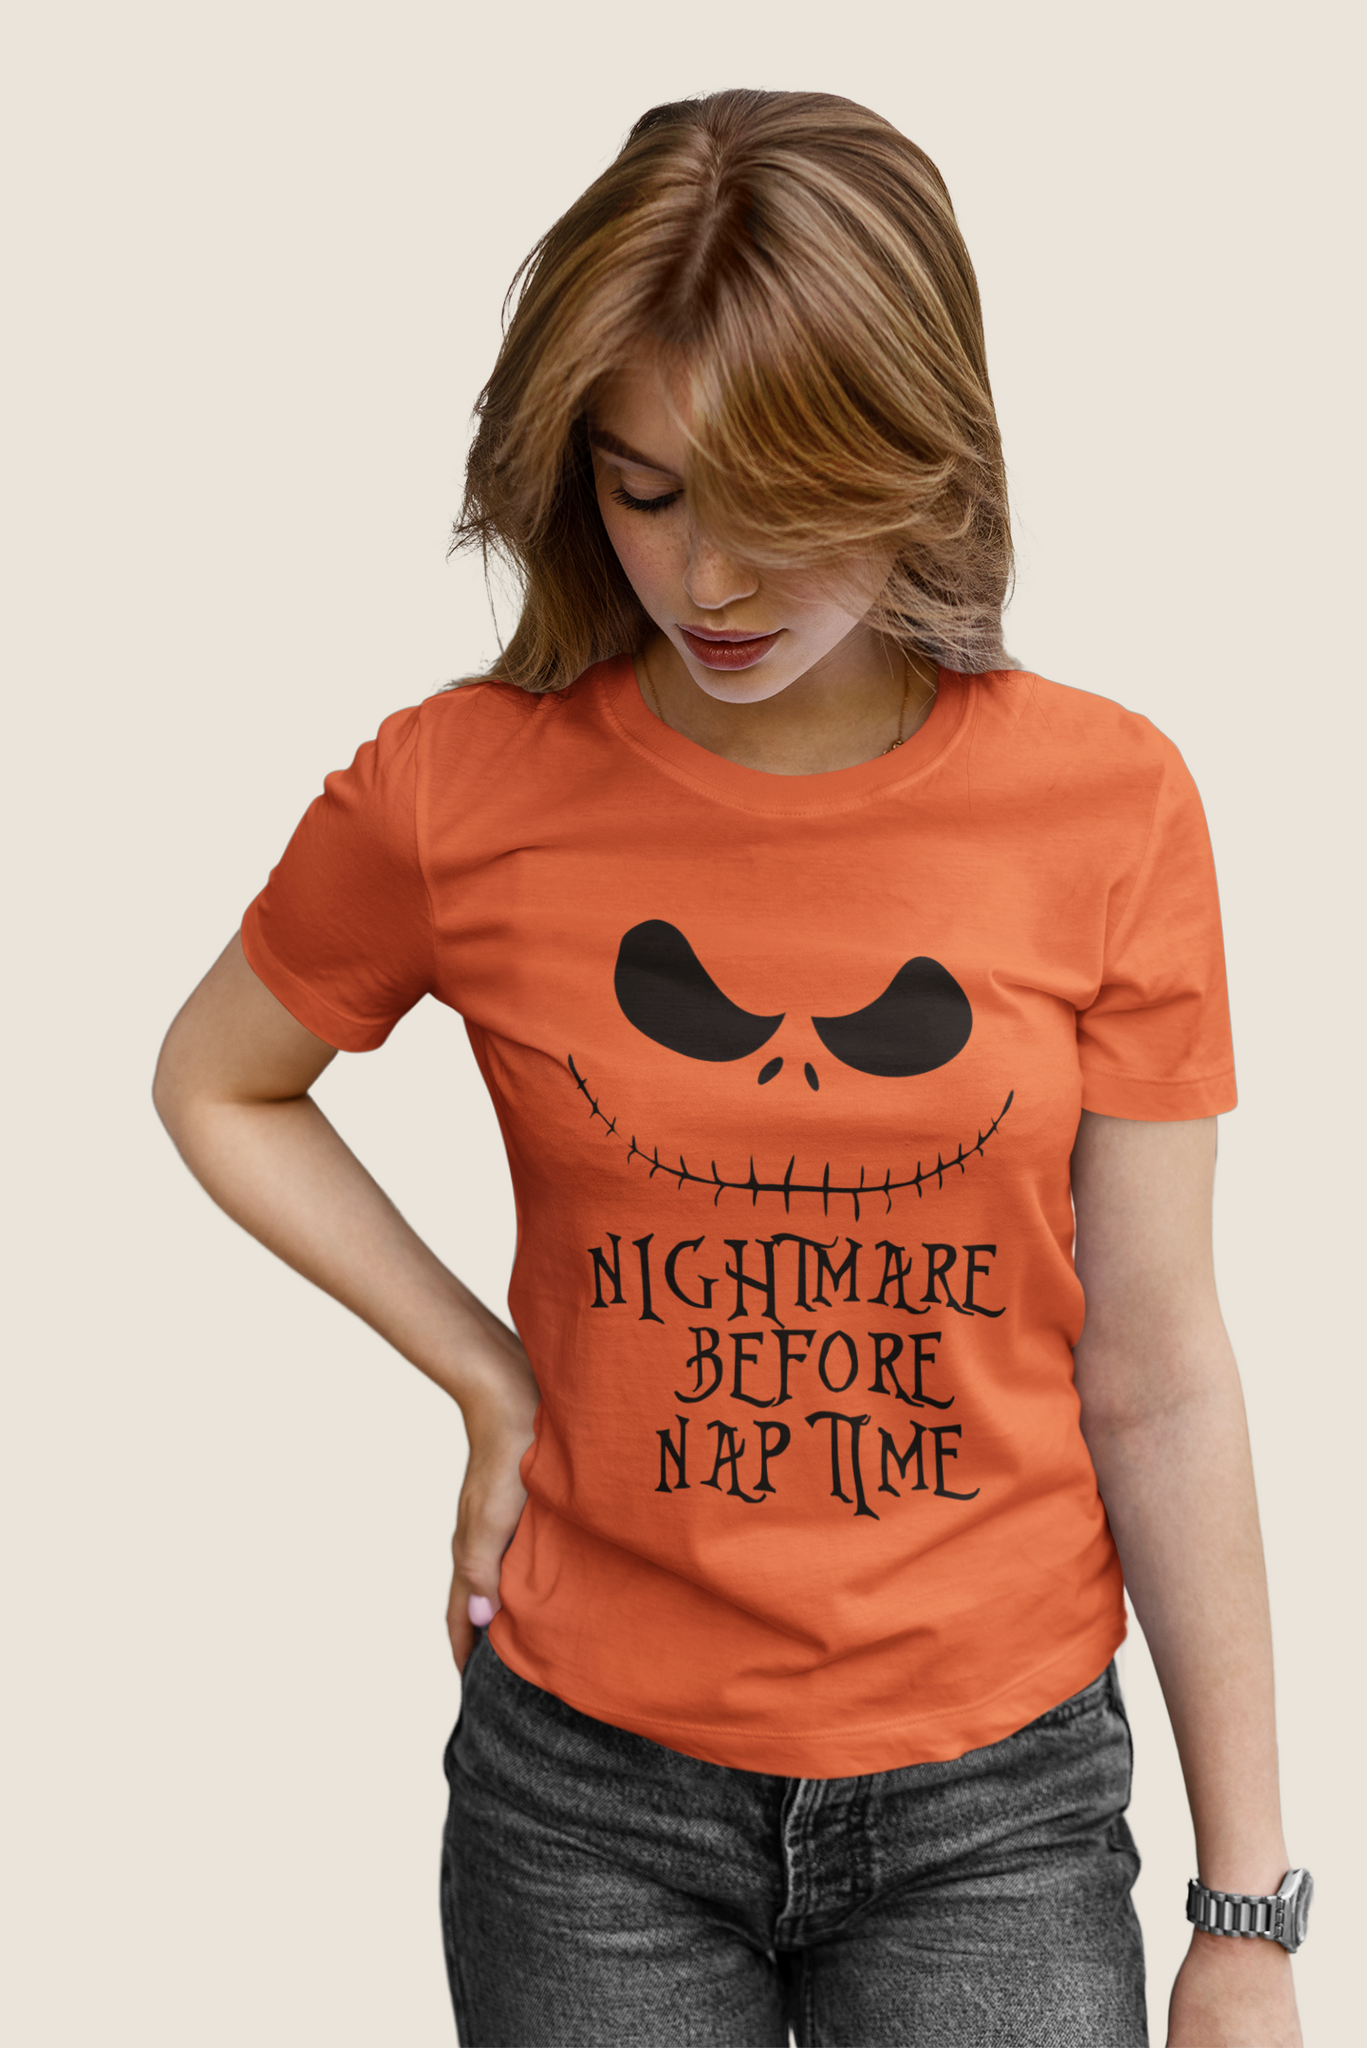 Nightmare Before Christmas T Shirt, Jack Skellington T Shirt, Nightmare Before Nap Time Tshirt, Halloween Gifts